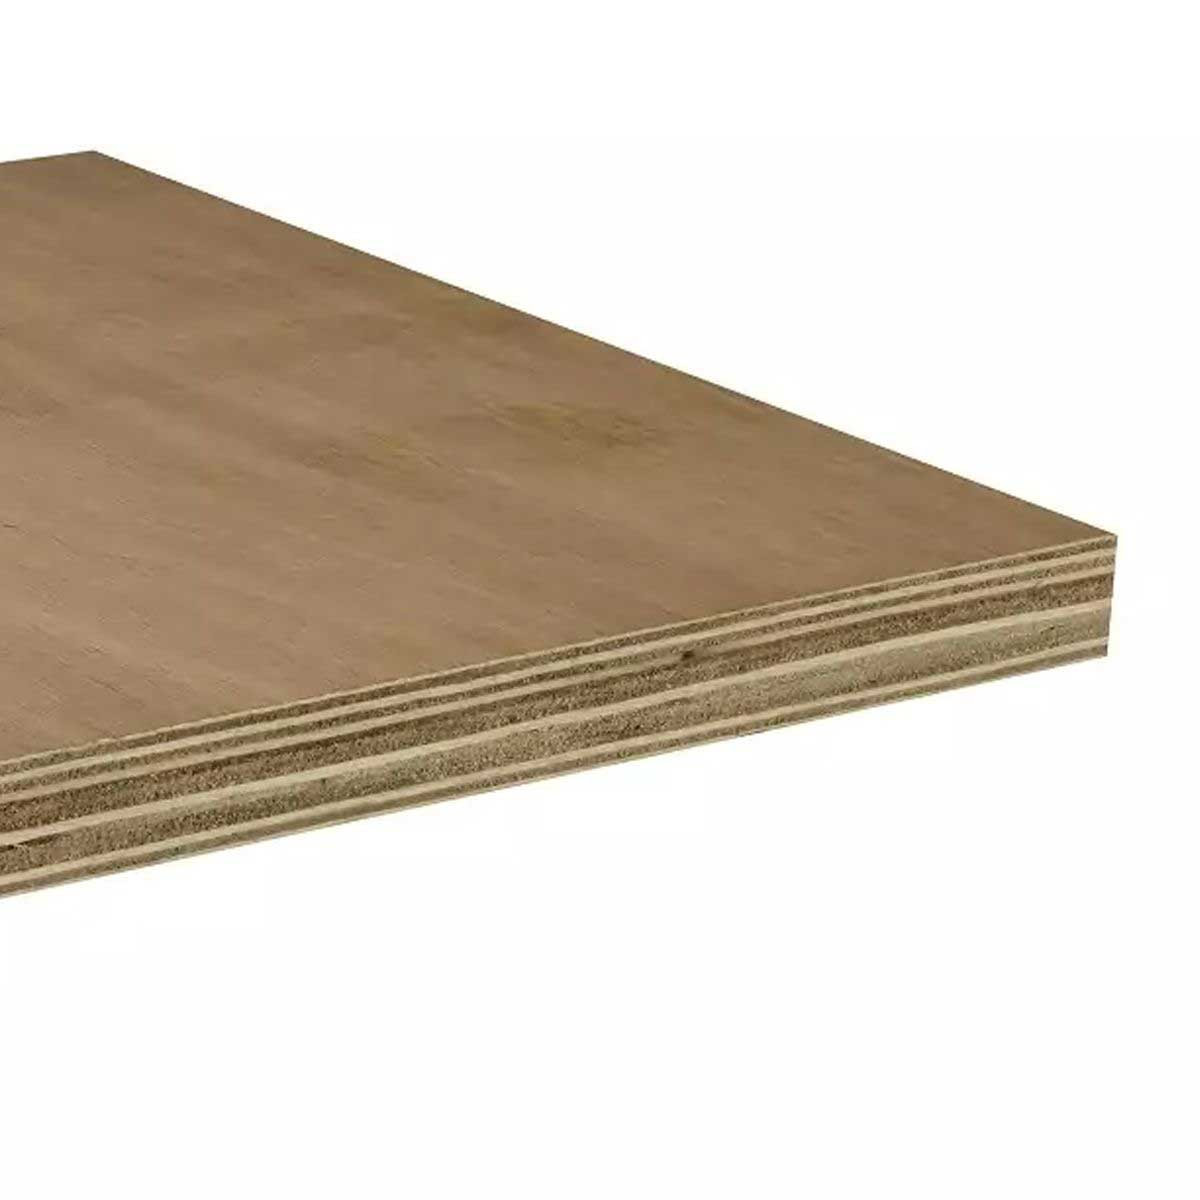 Photograph of Chinese Red Faced Poplar Core Plywood 2440mm x 1220mm x 5.5mm